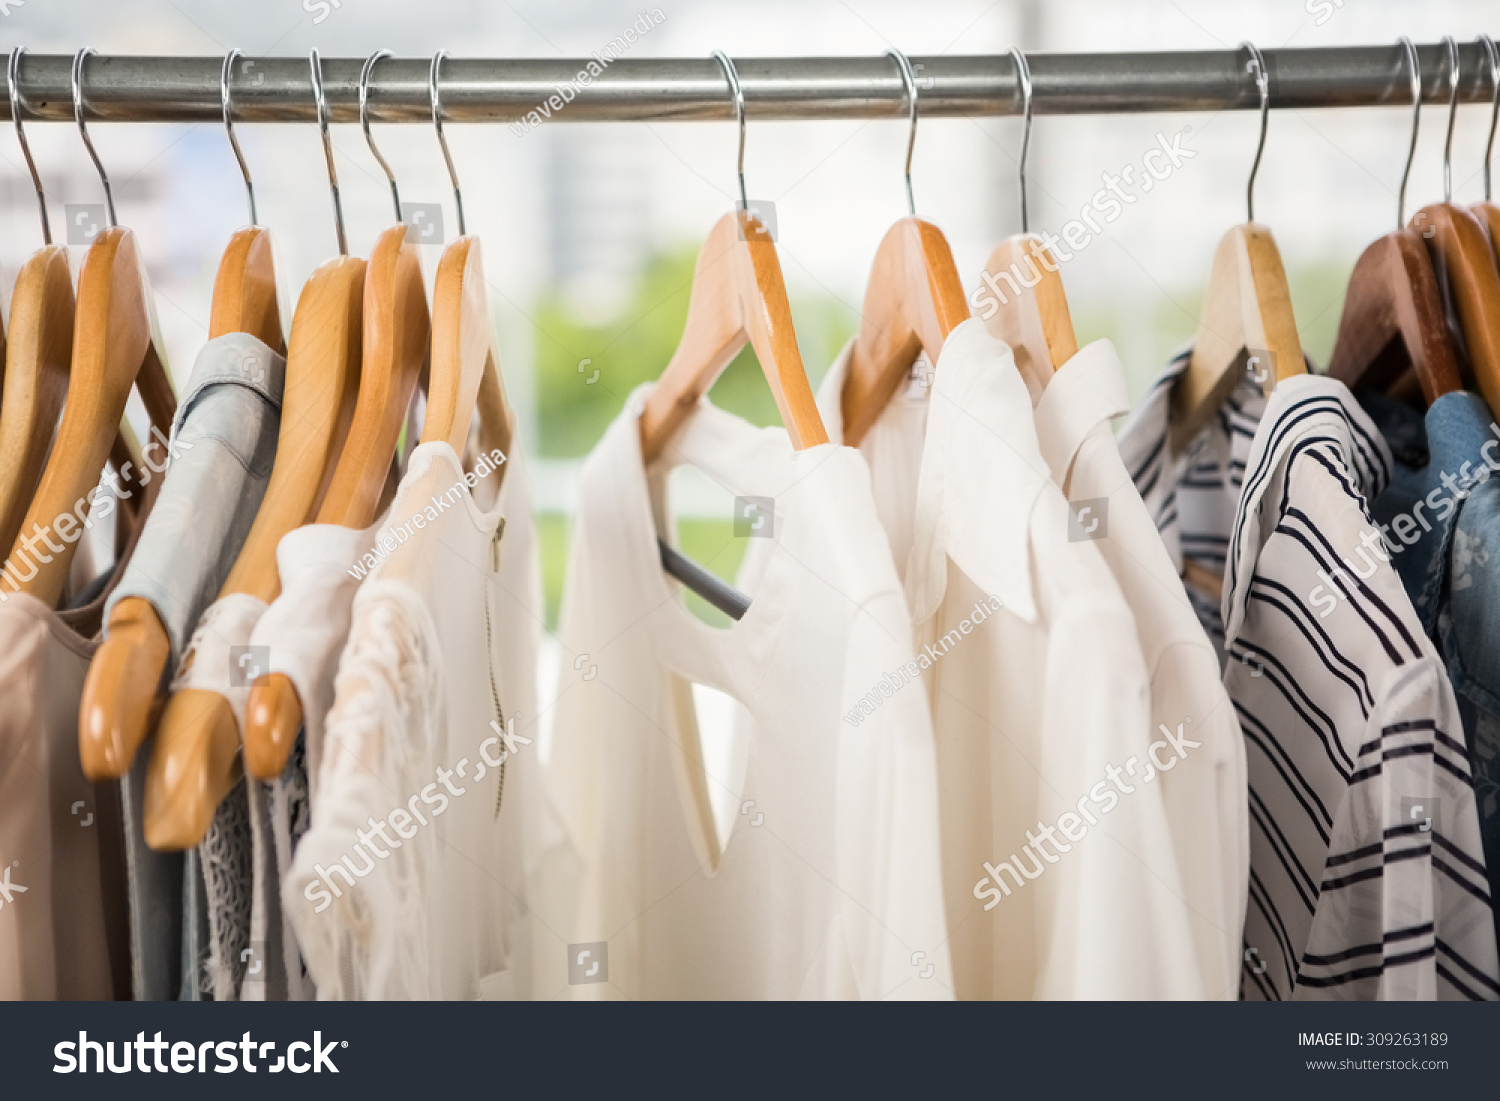 Clothes On Clothes Rail In Clothing Store Stock Photo 309263189 ...